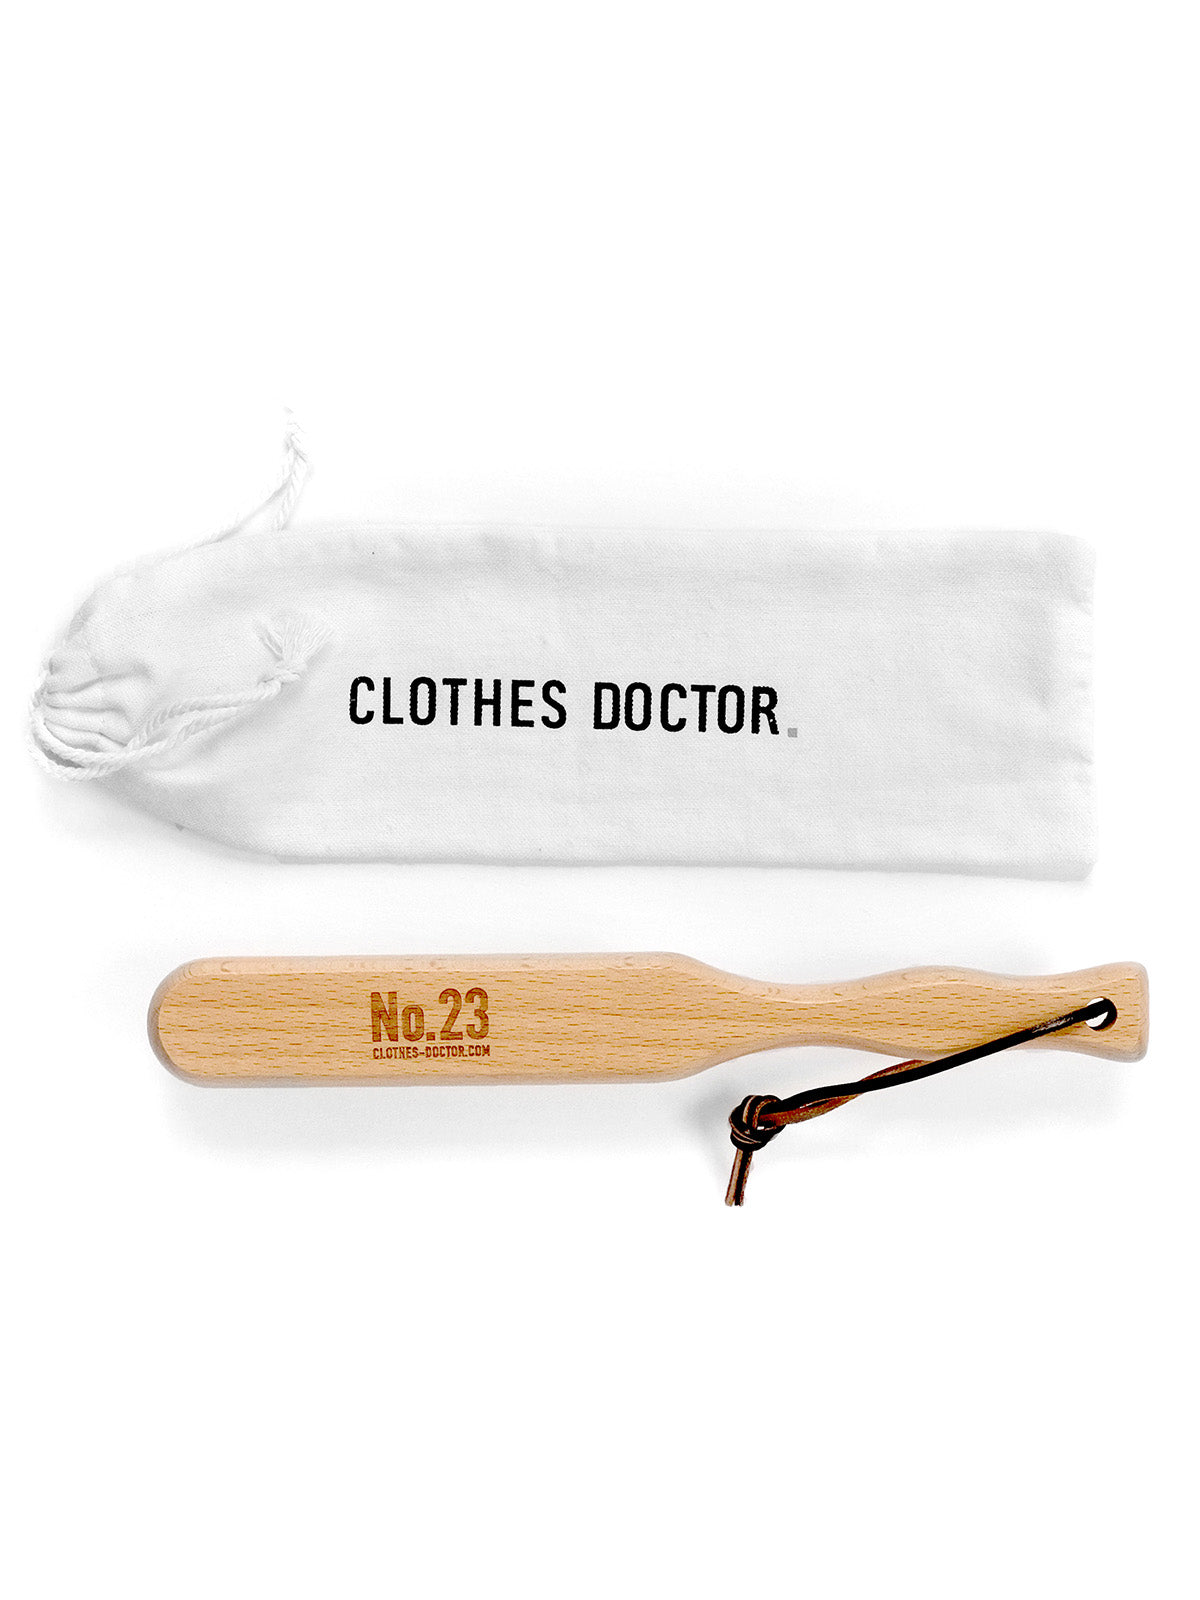 Clothes Doctor Natural Bristle Clothes Brush - SILVER